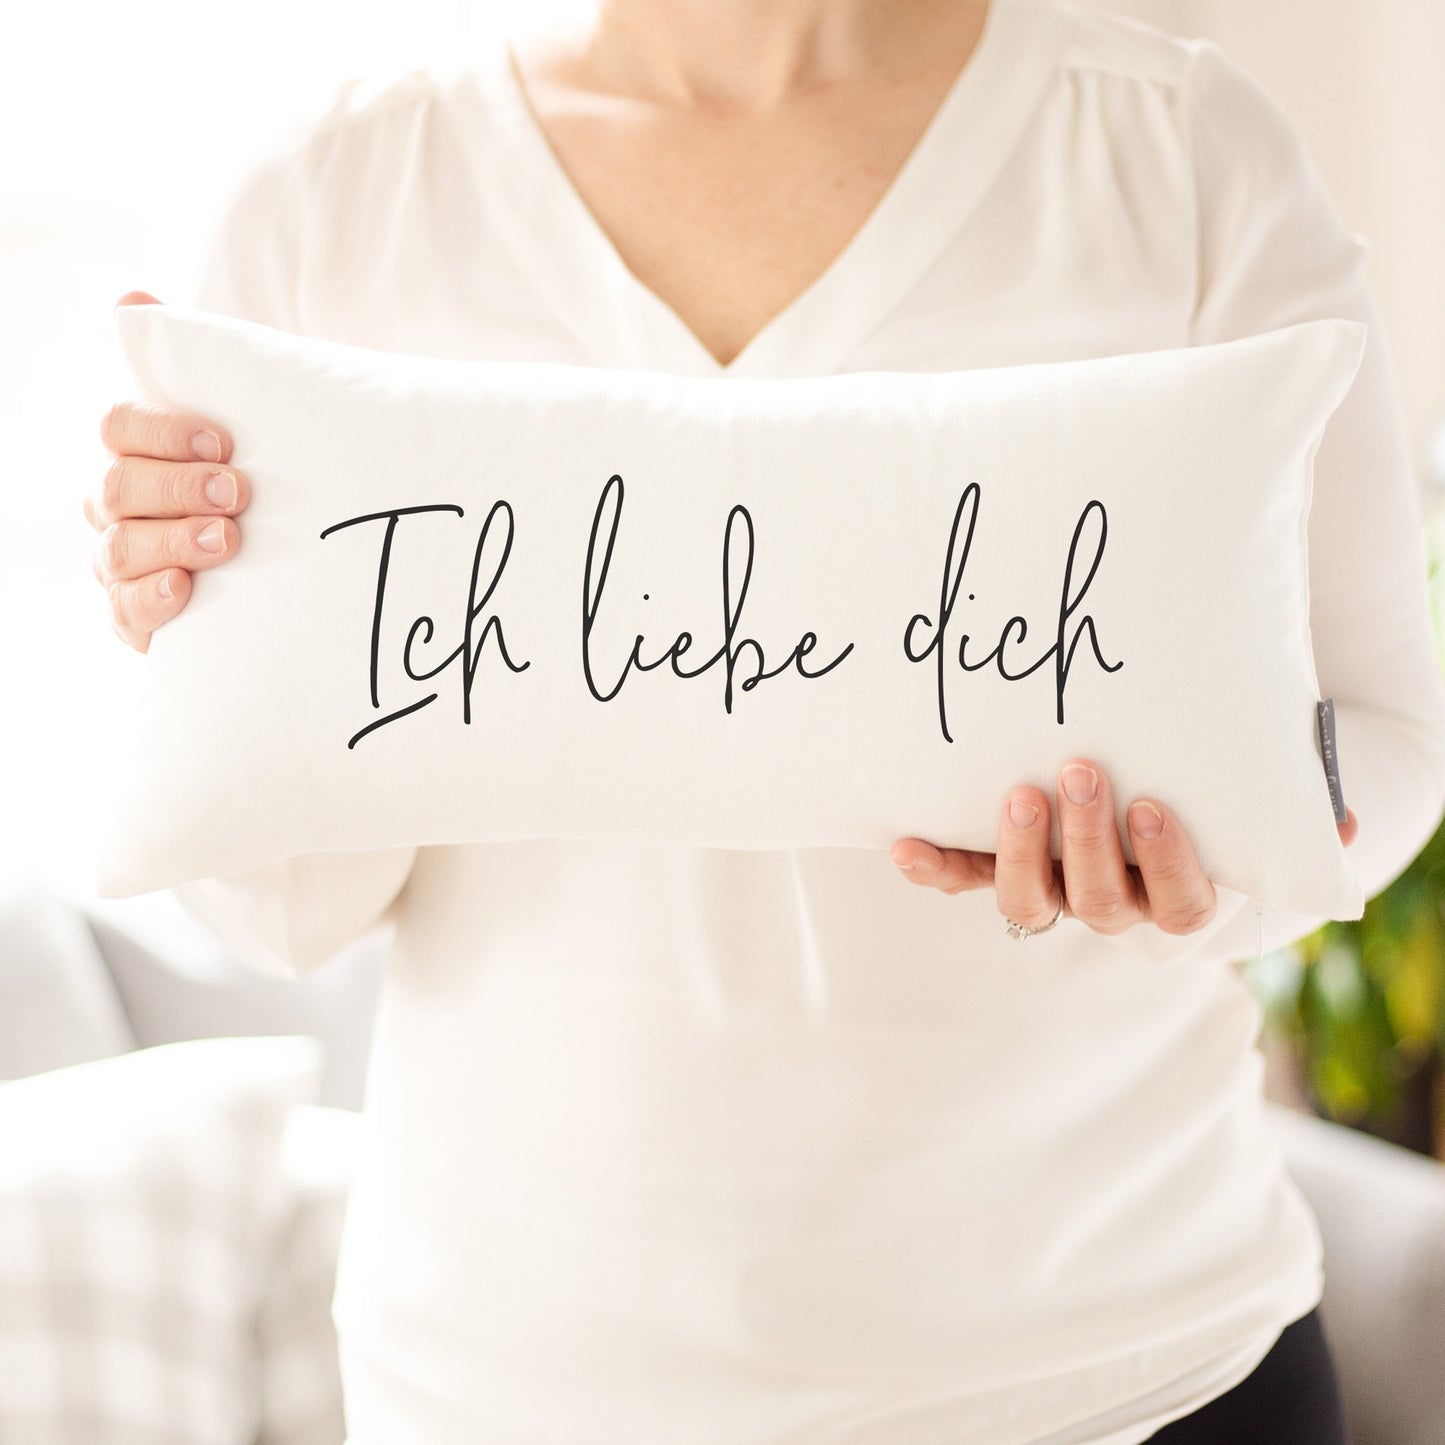 Ich liebe dich I Love You in German Pillow | Valentine's Day Gift | Dorm Decor | Gifts For Her | Gifts For Him | Valentines Day Pillow Decor